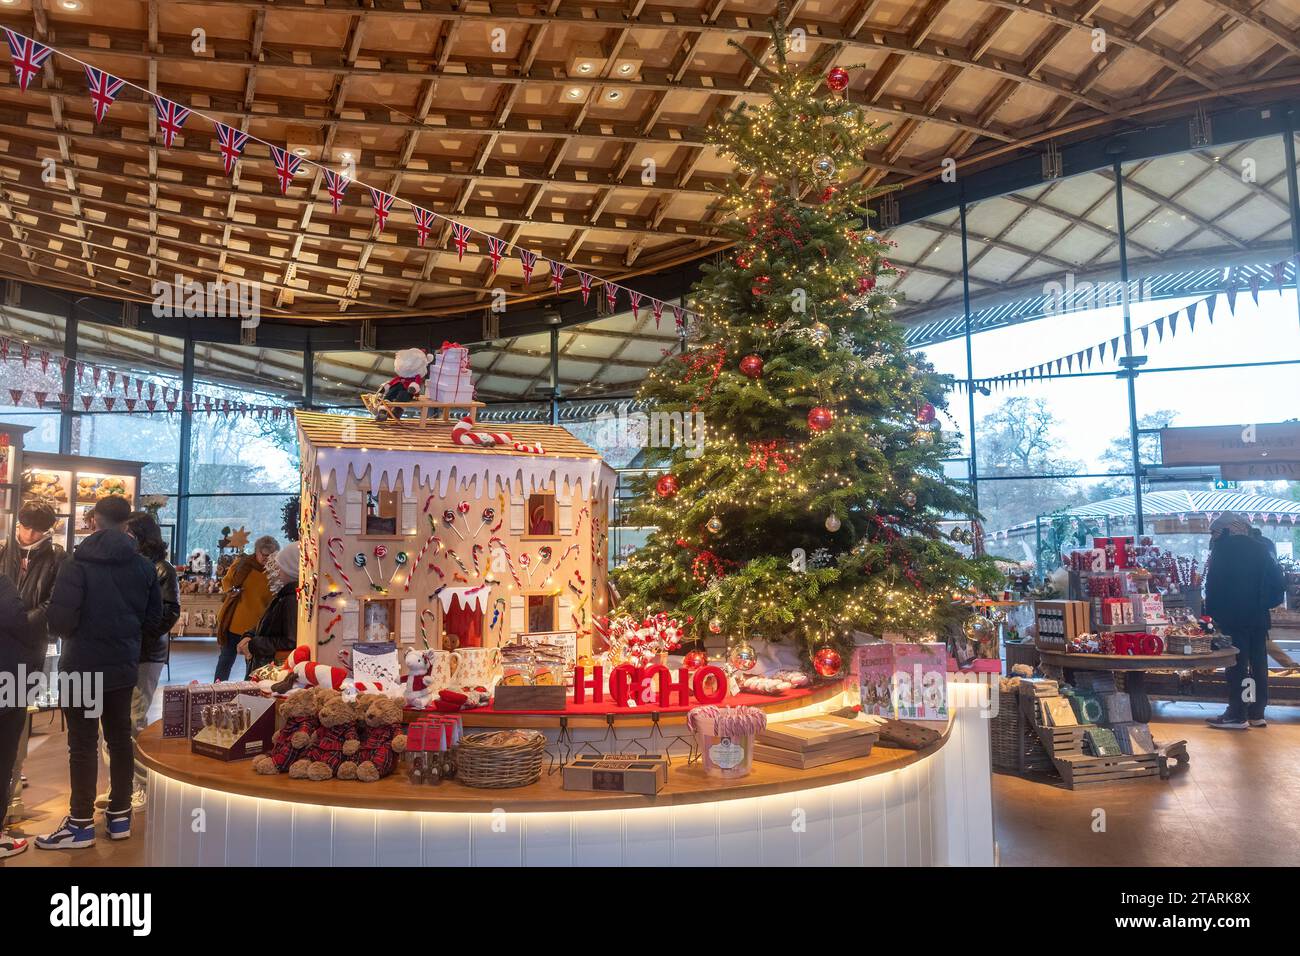 People Christmas shopping in Savill Garden visitor centre, England, UK. Garden centre with Christmas tree and decorations. Stock Photo